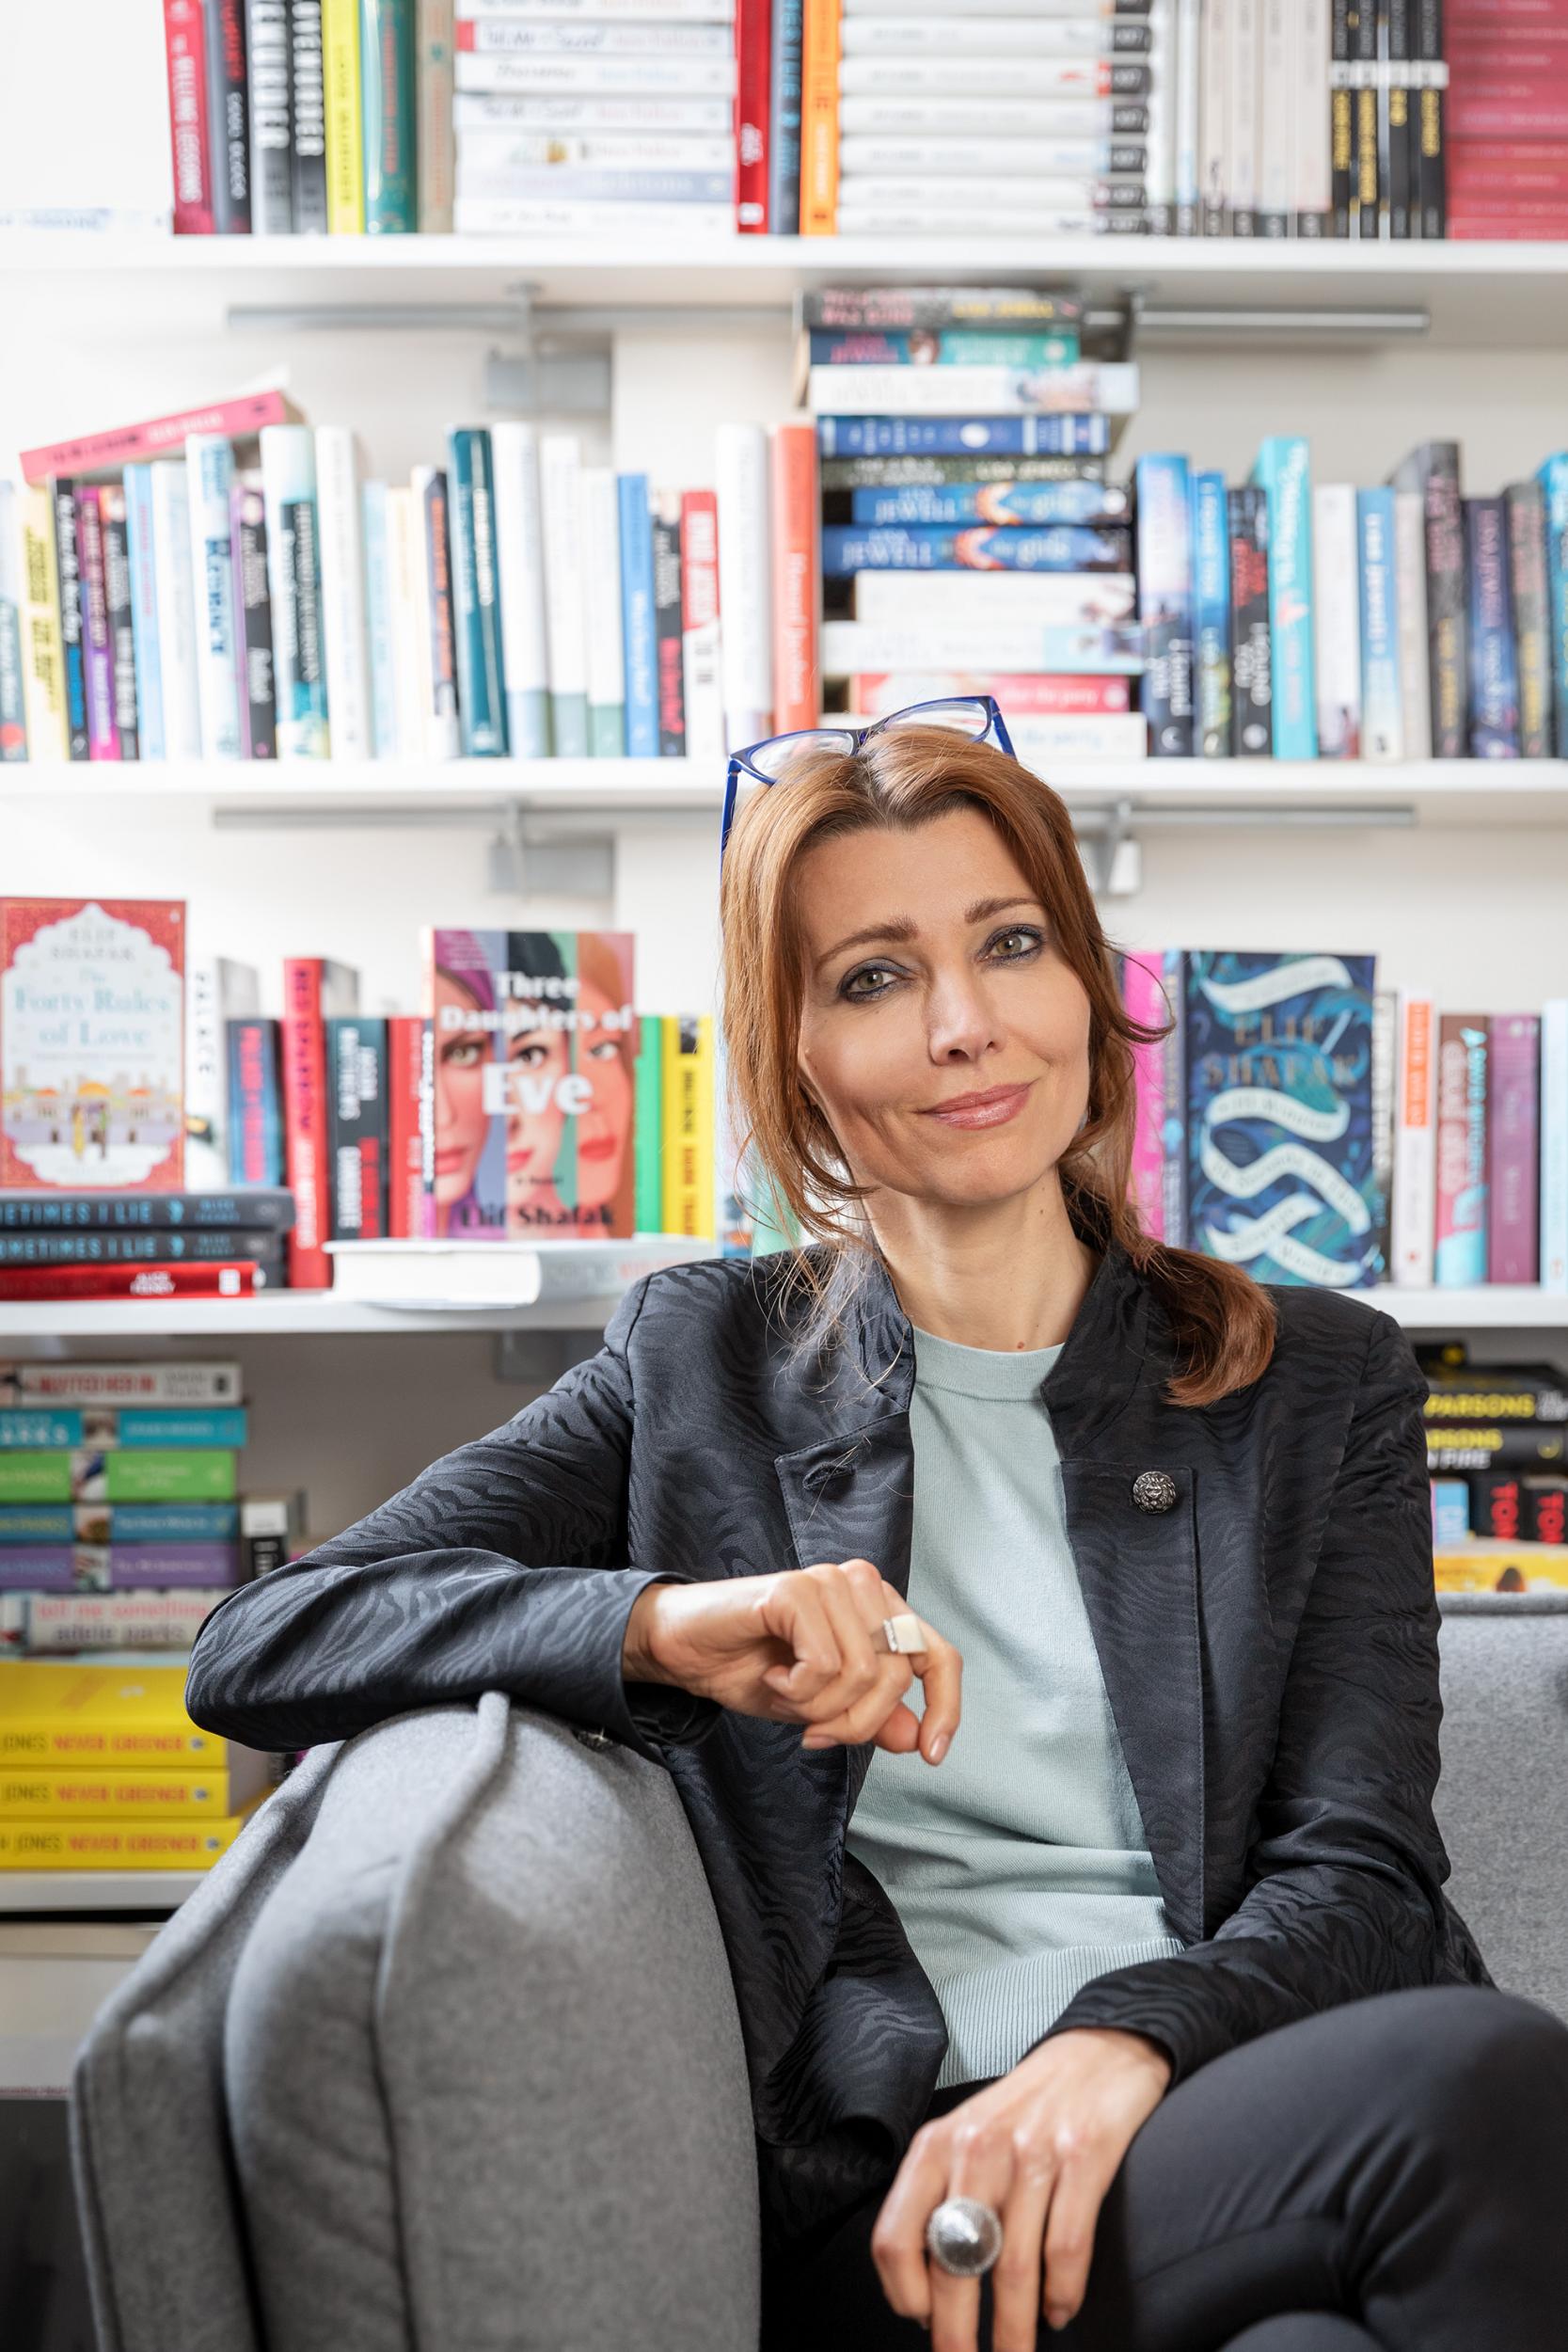 Elif Shafak’s novel ‘10 Minutes 30 Seconds in This Strange World’ is a grim story about a sex worker who is murdered